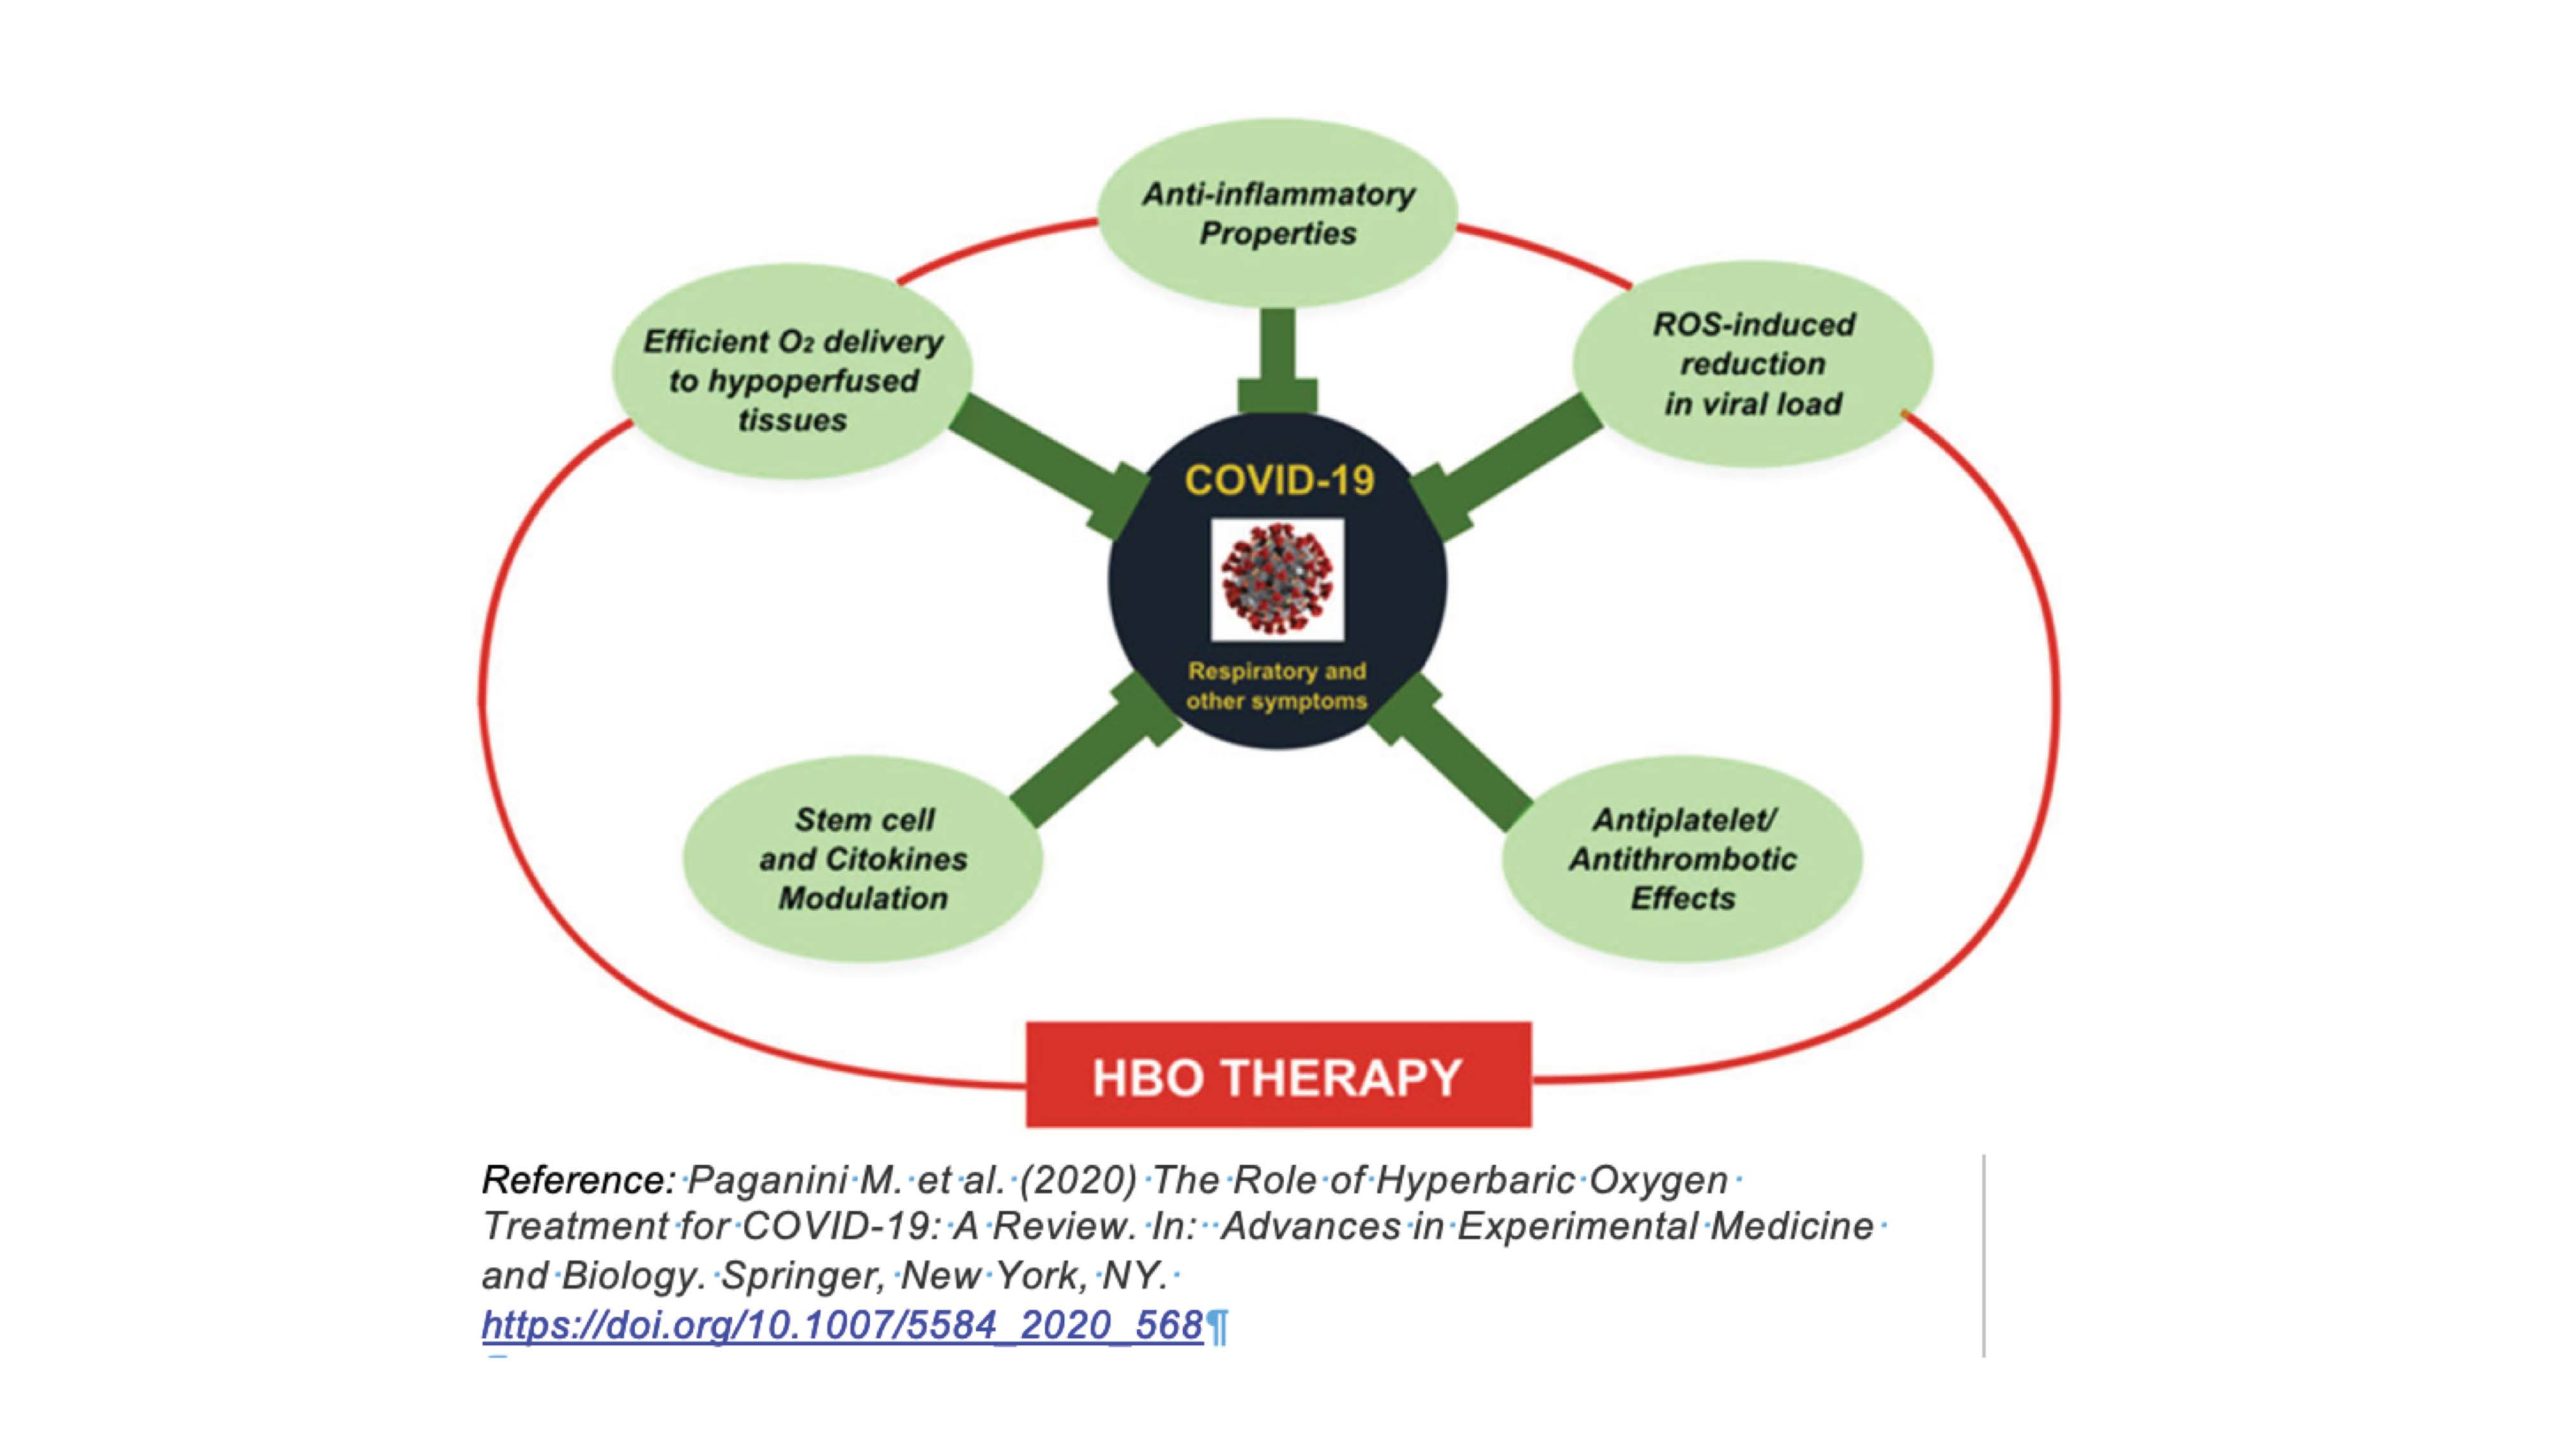 HBOT For The Treatment Of Severe COVID-19 Disease